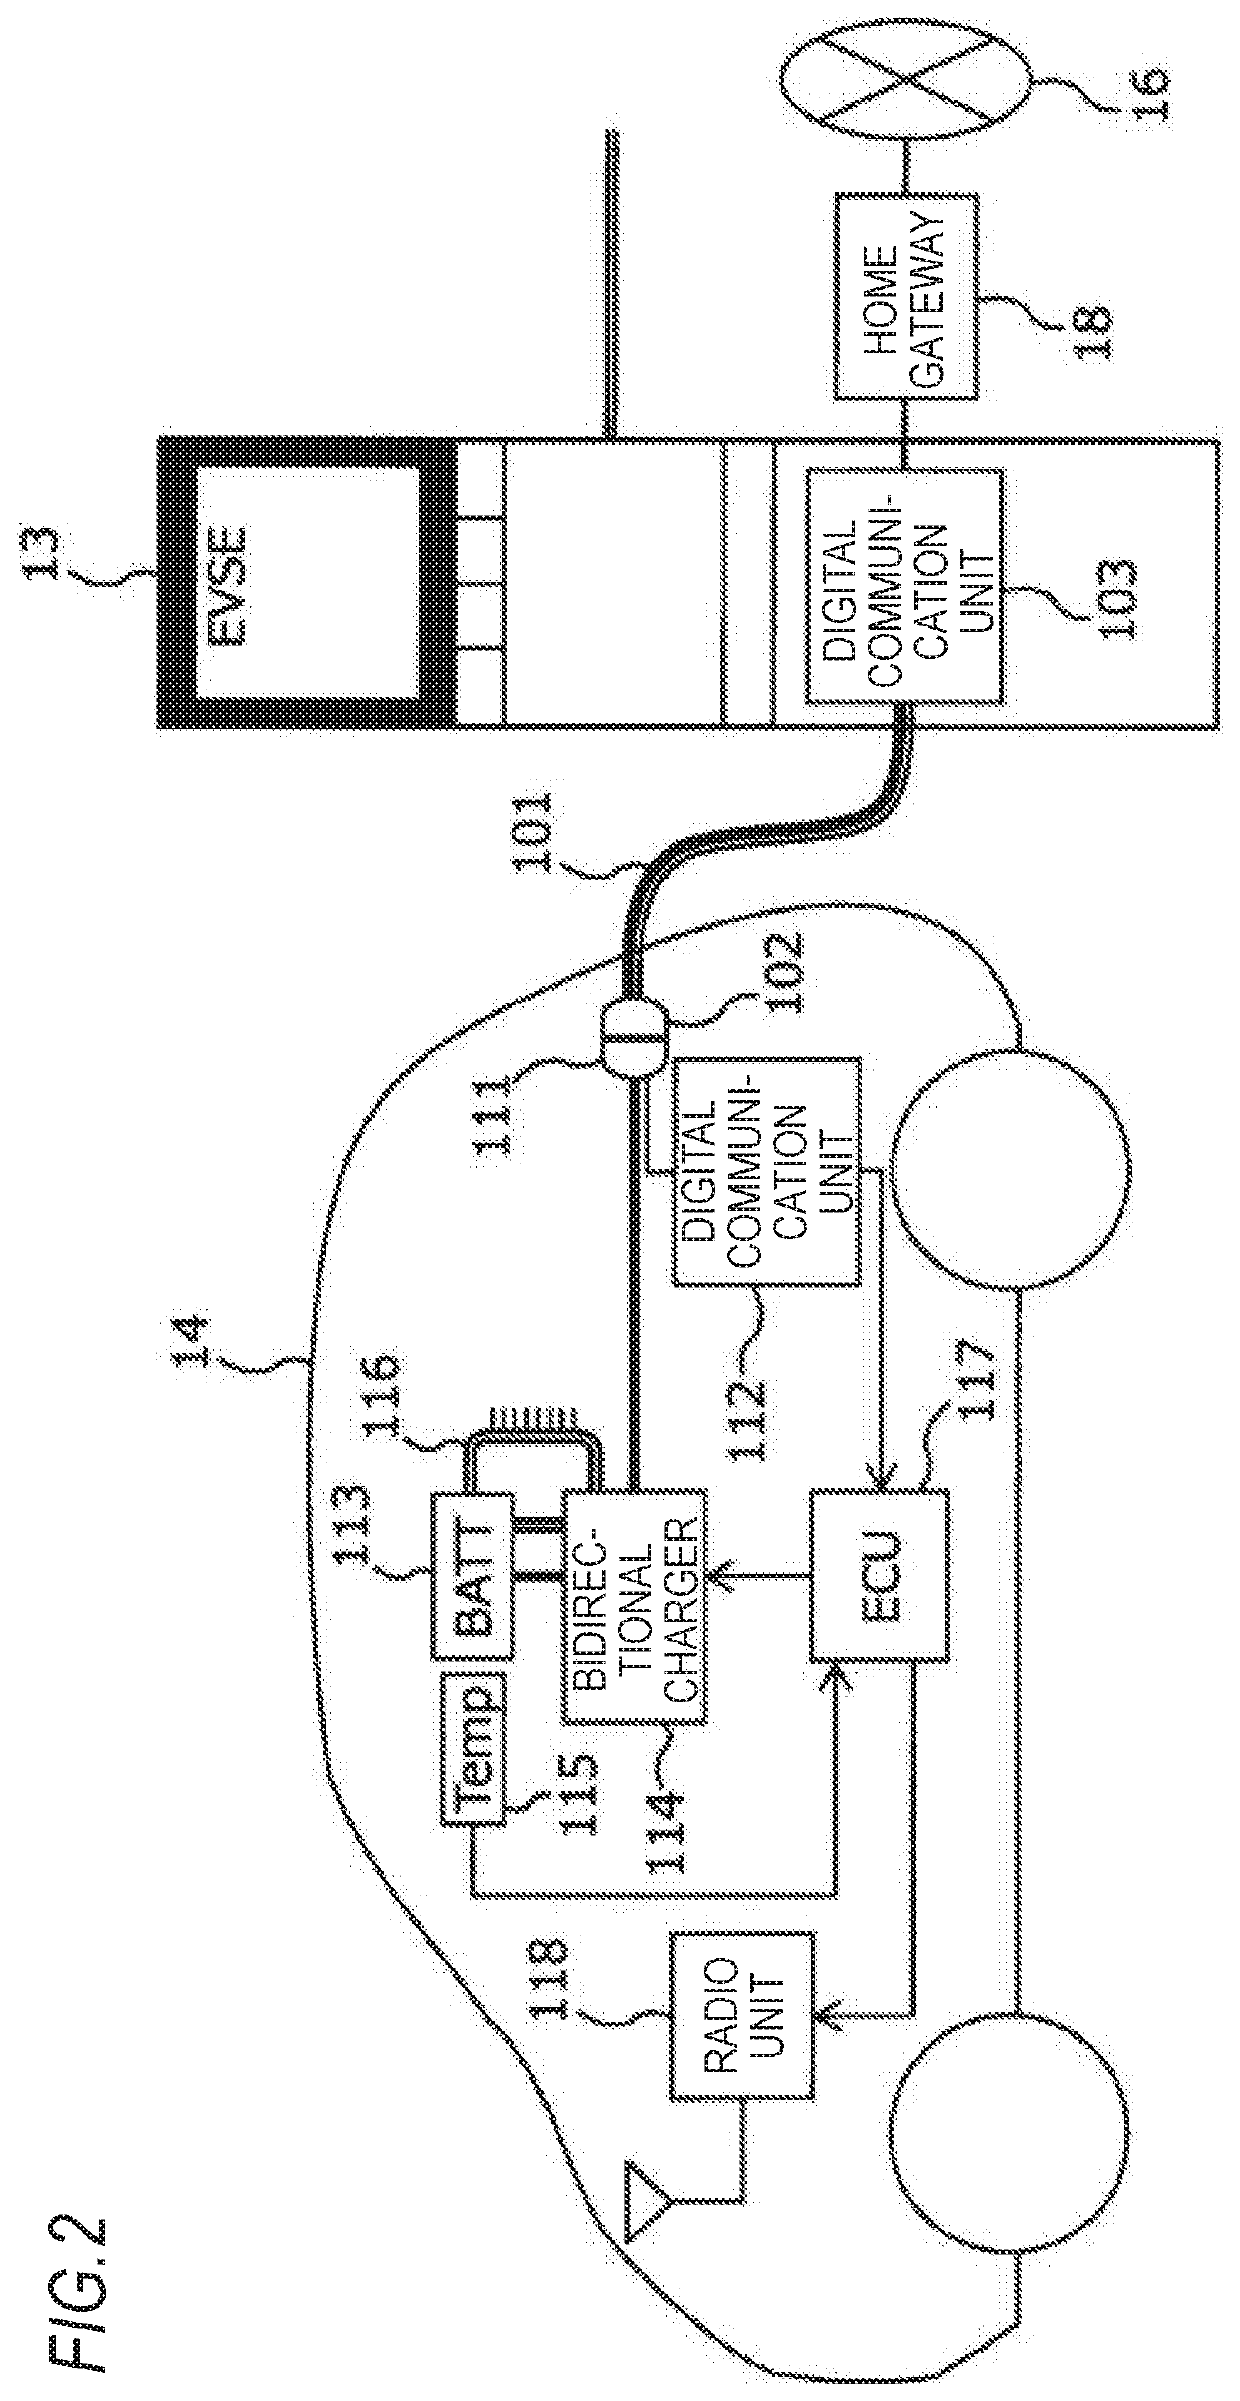 Charge and discharge control device